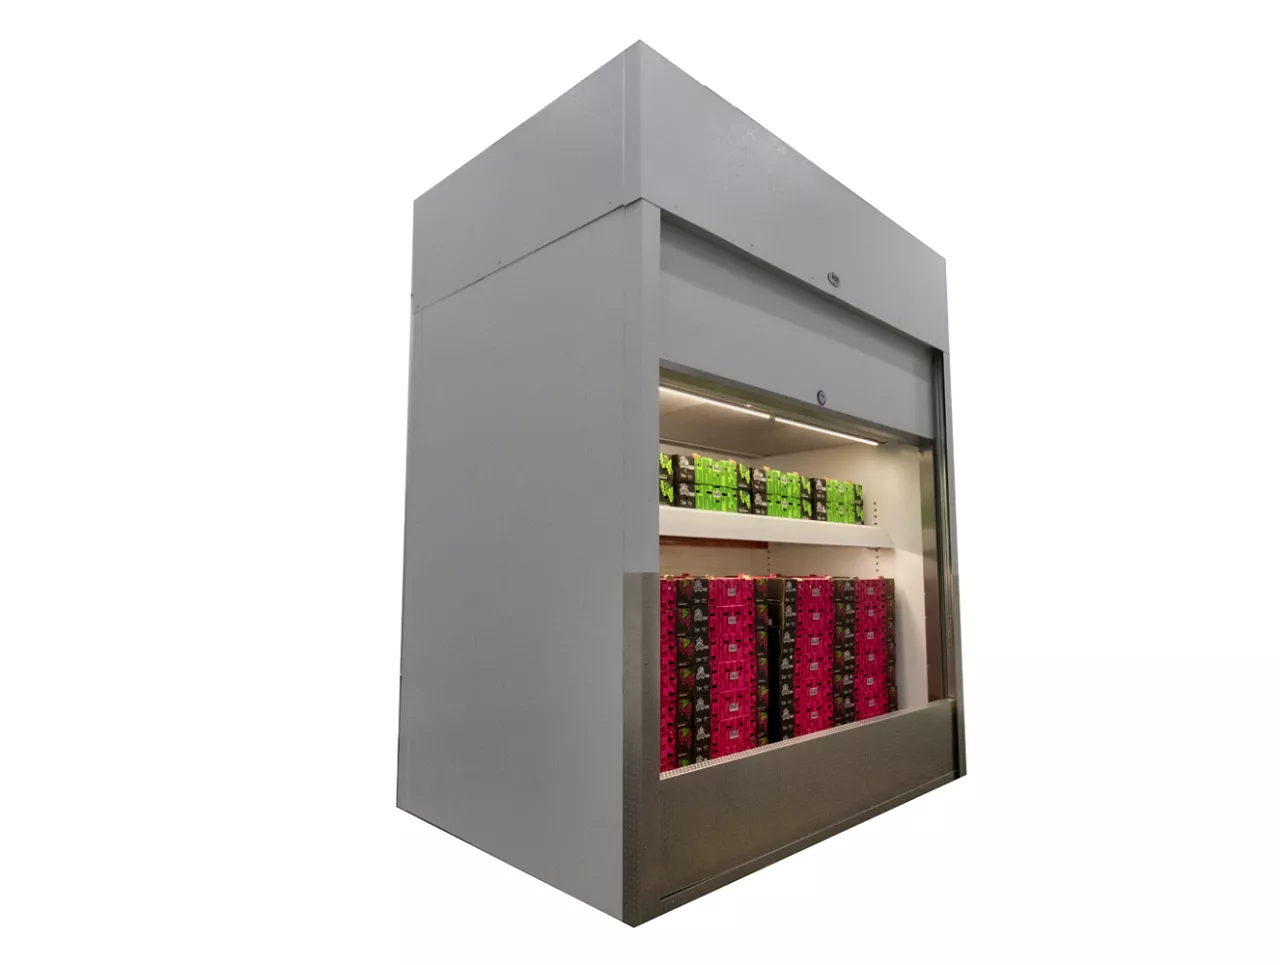 KPS GLOBAL Introduces Accessible Cold Environments as Newest Cold Storage Innovation